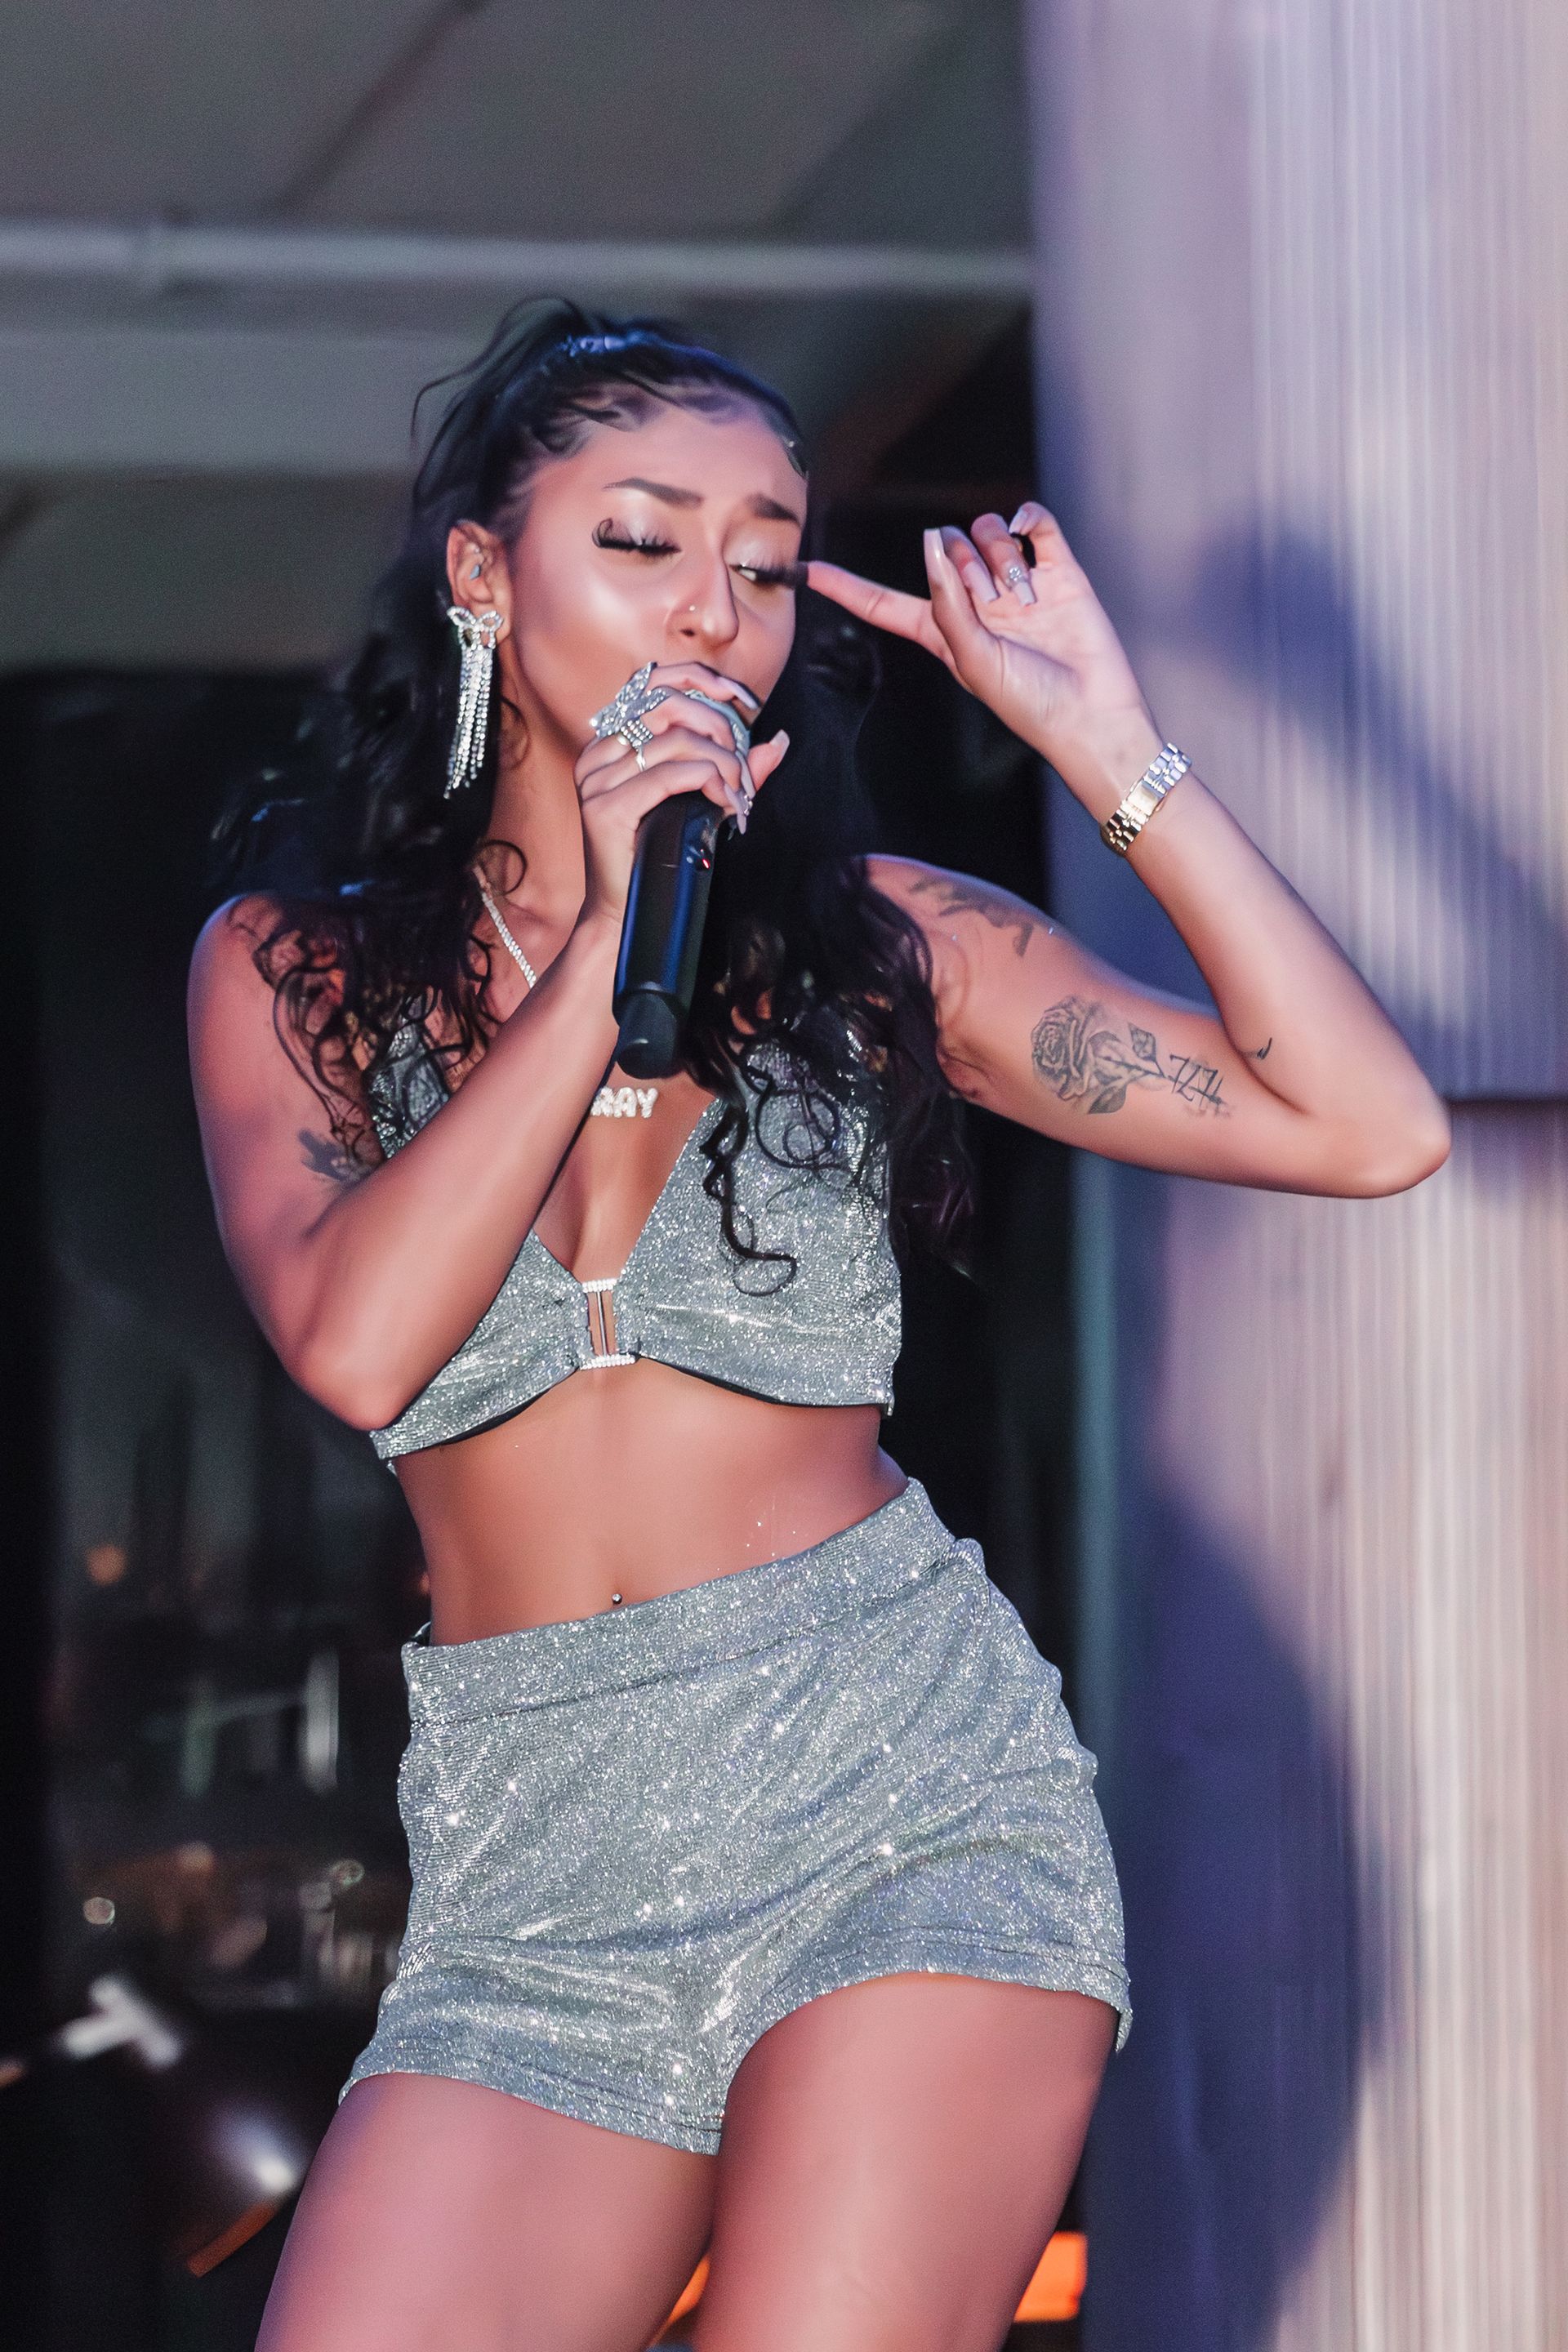 a woman in a crop top and shorts is singing into a microphone .